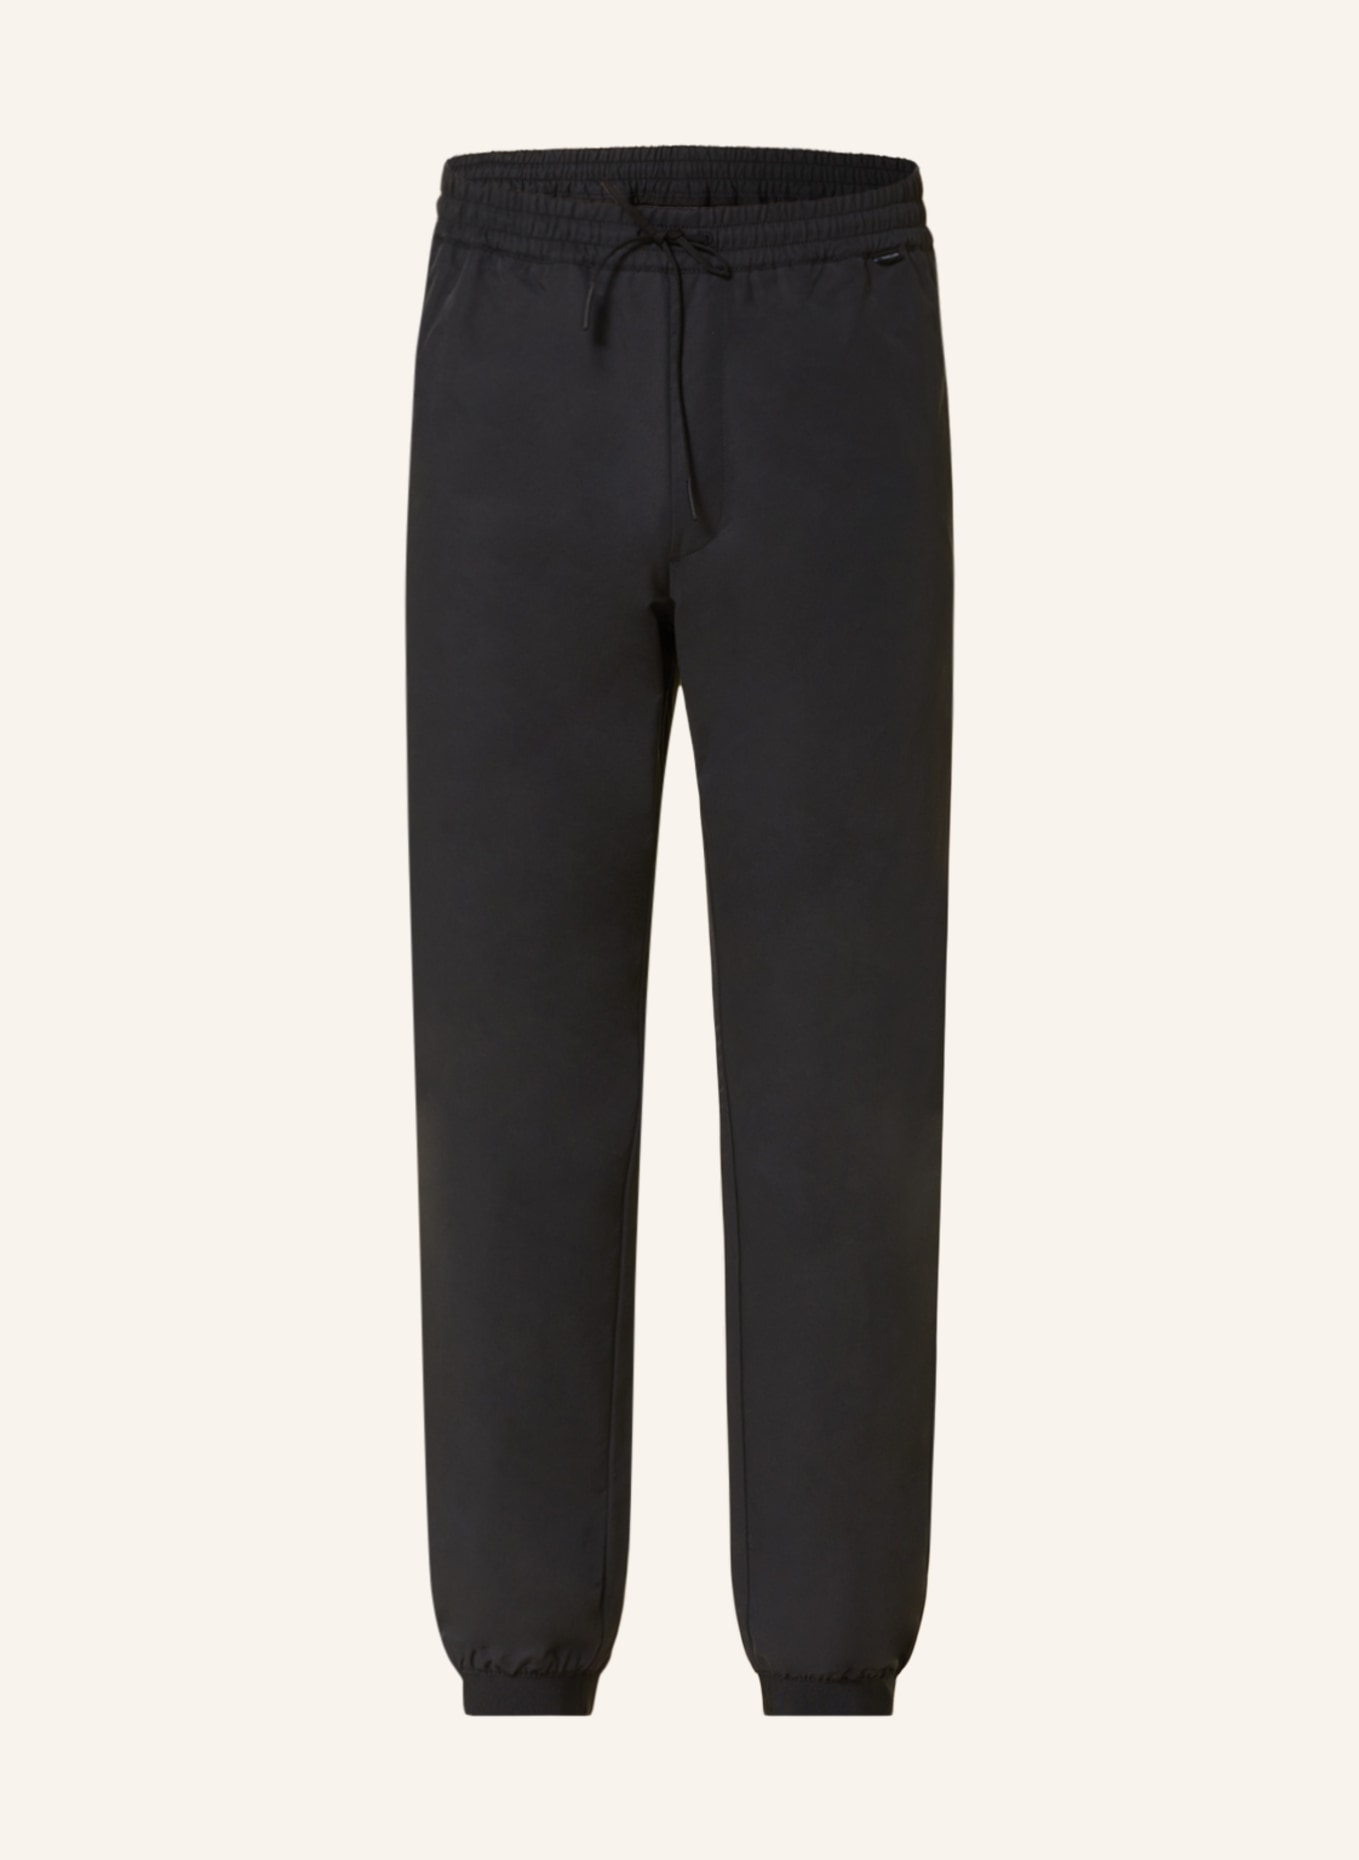 MONCLER Pants in jogger style extra slim fit, Color: BLACK (Image 1)